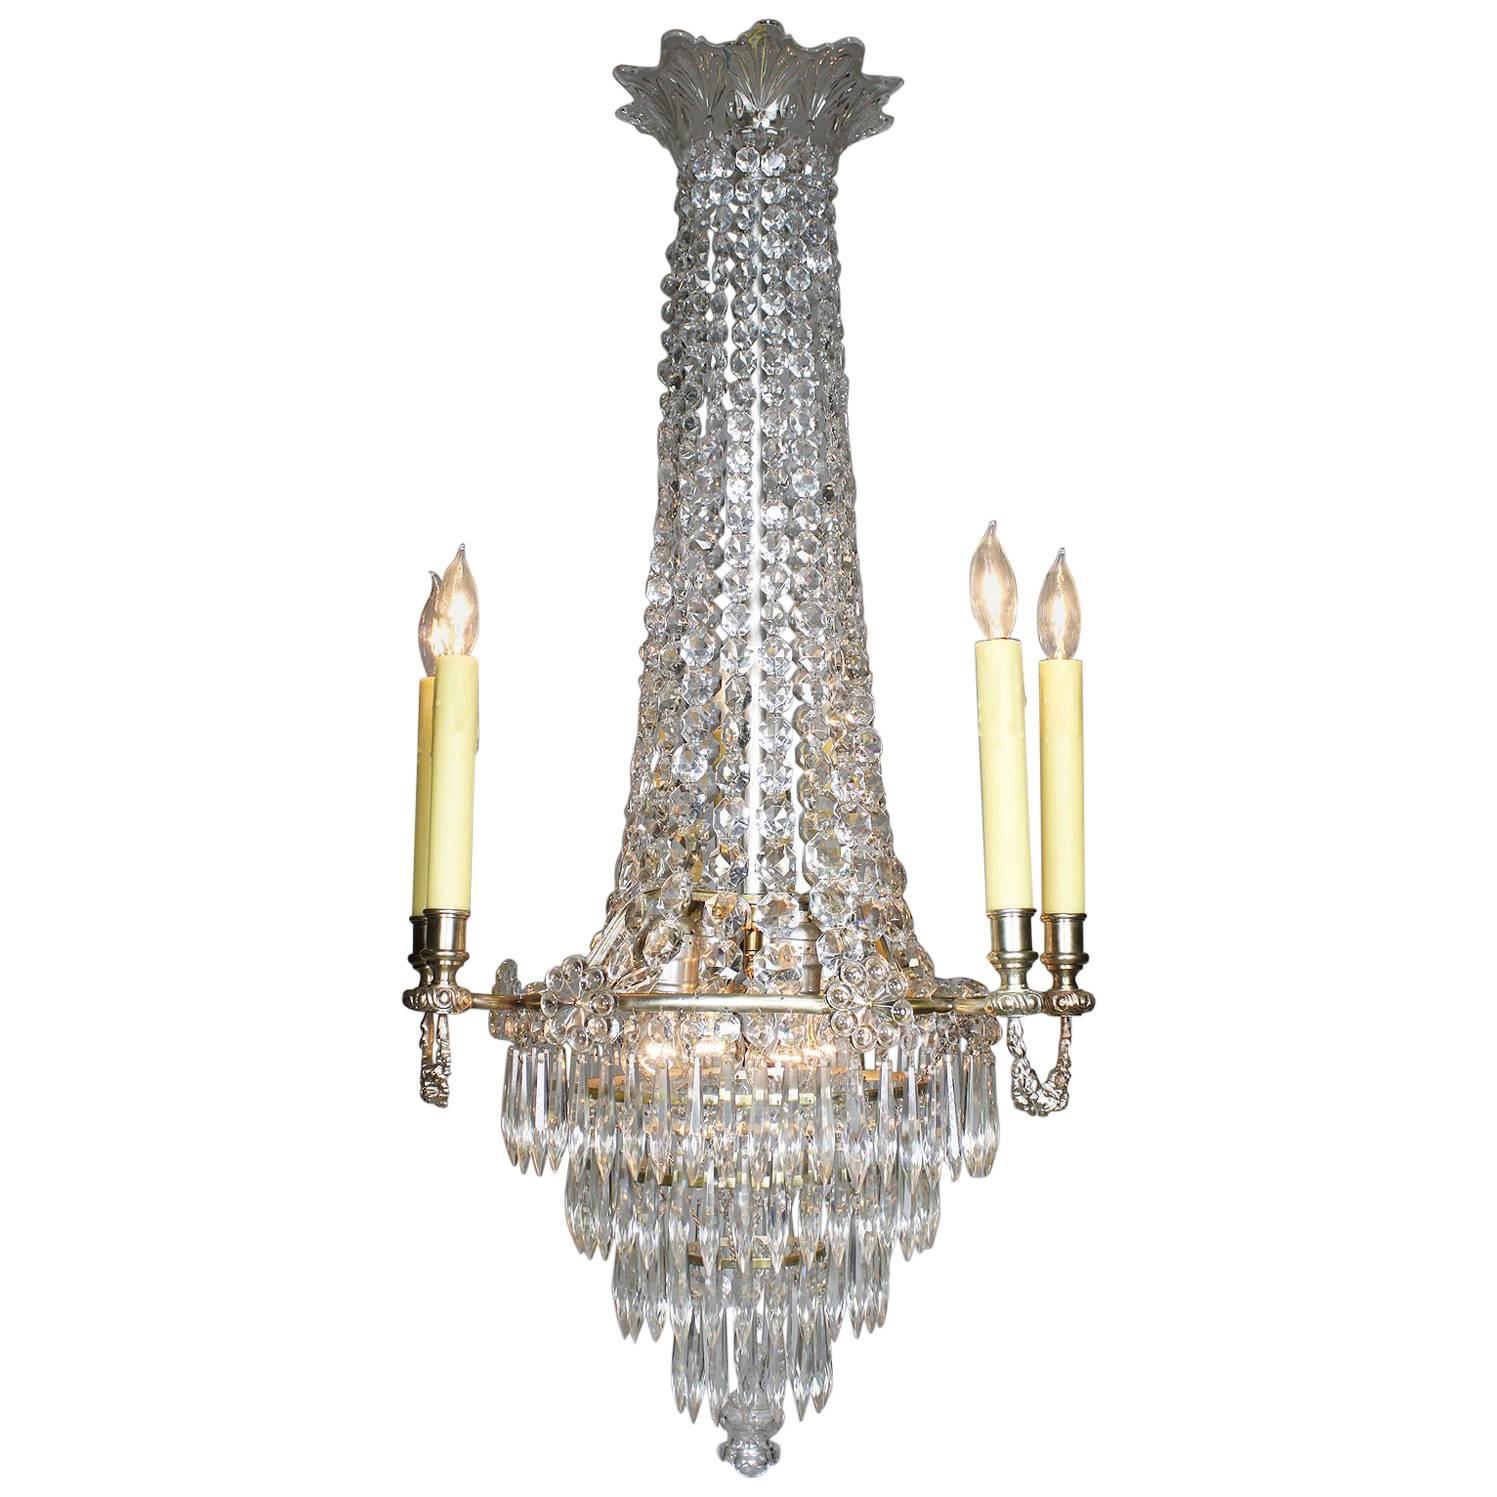 French 19th-20th Century Louis XVI Style Silvered Bronze & Cut-Glass Chandelier